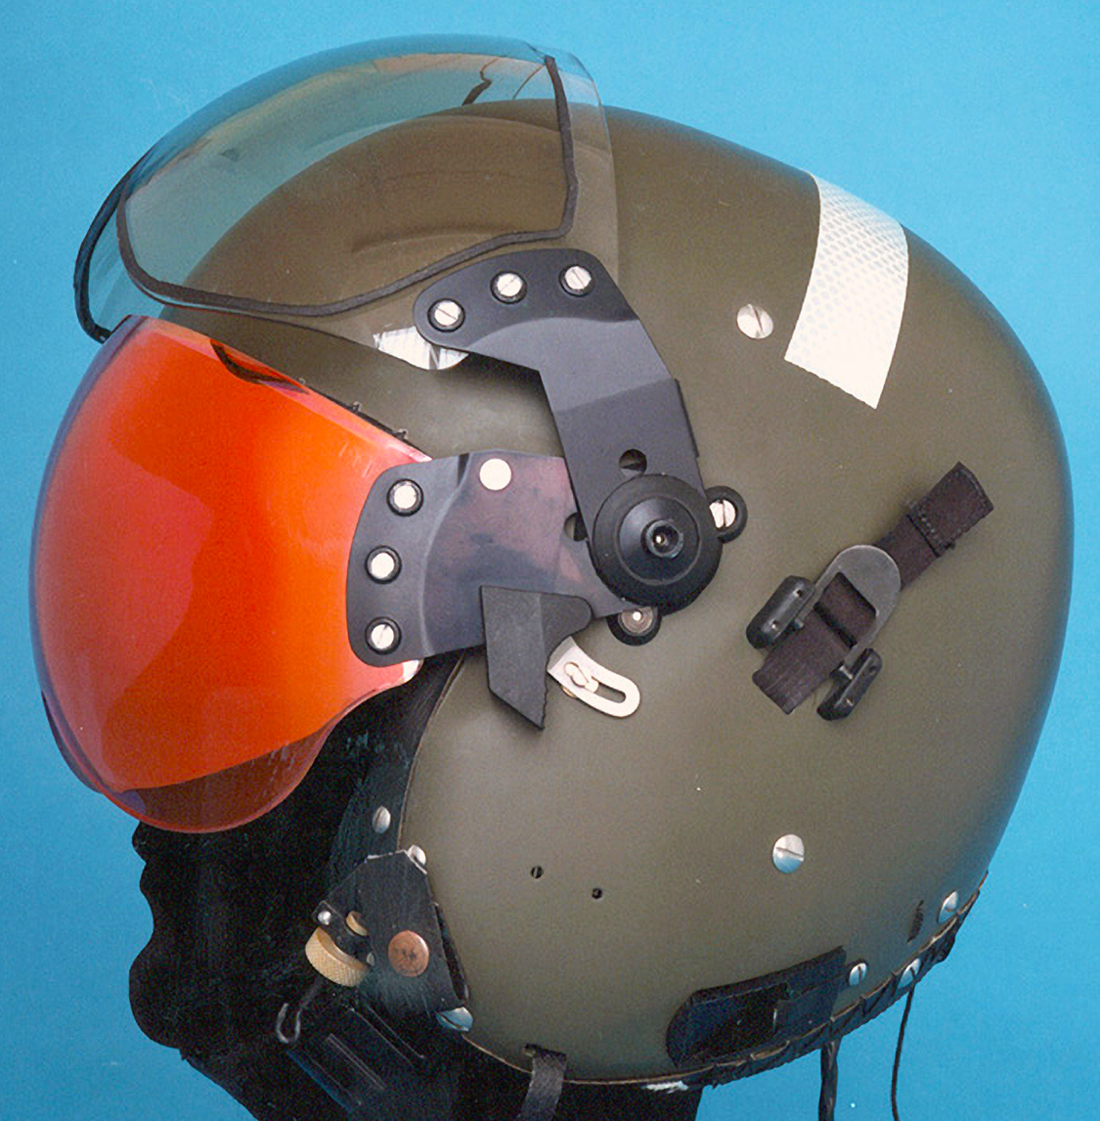 LEP Aircrew Helmet with laser protection visor